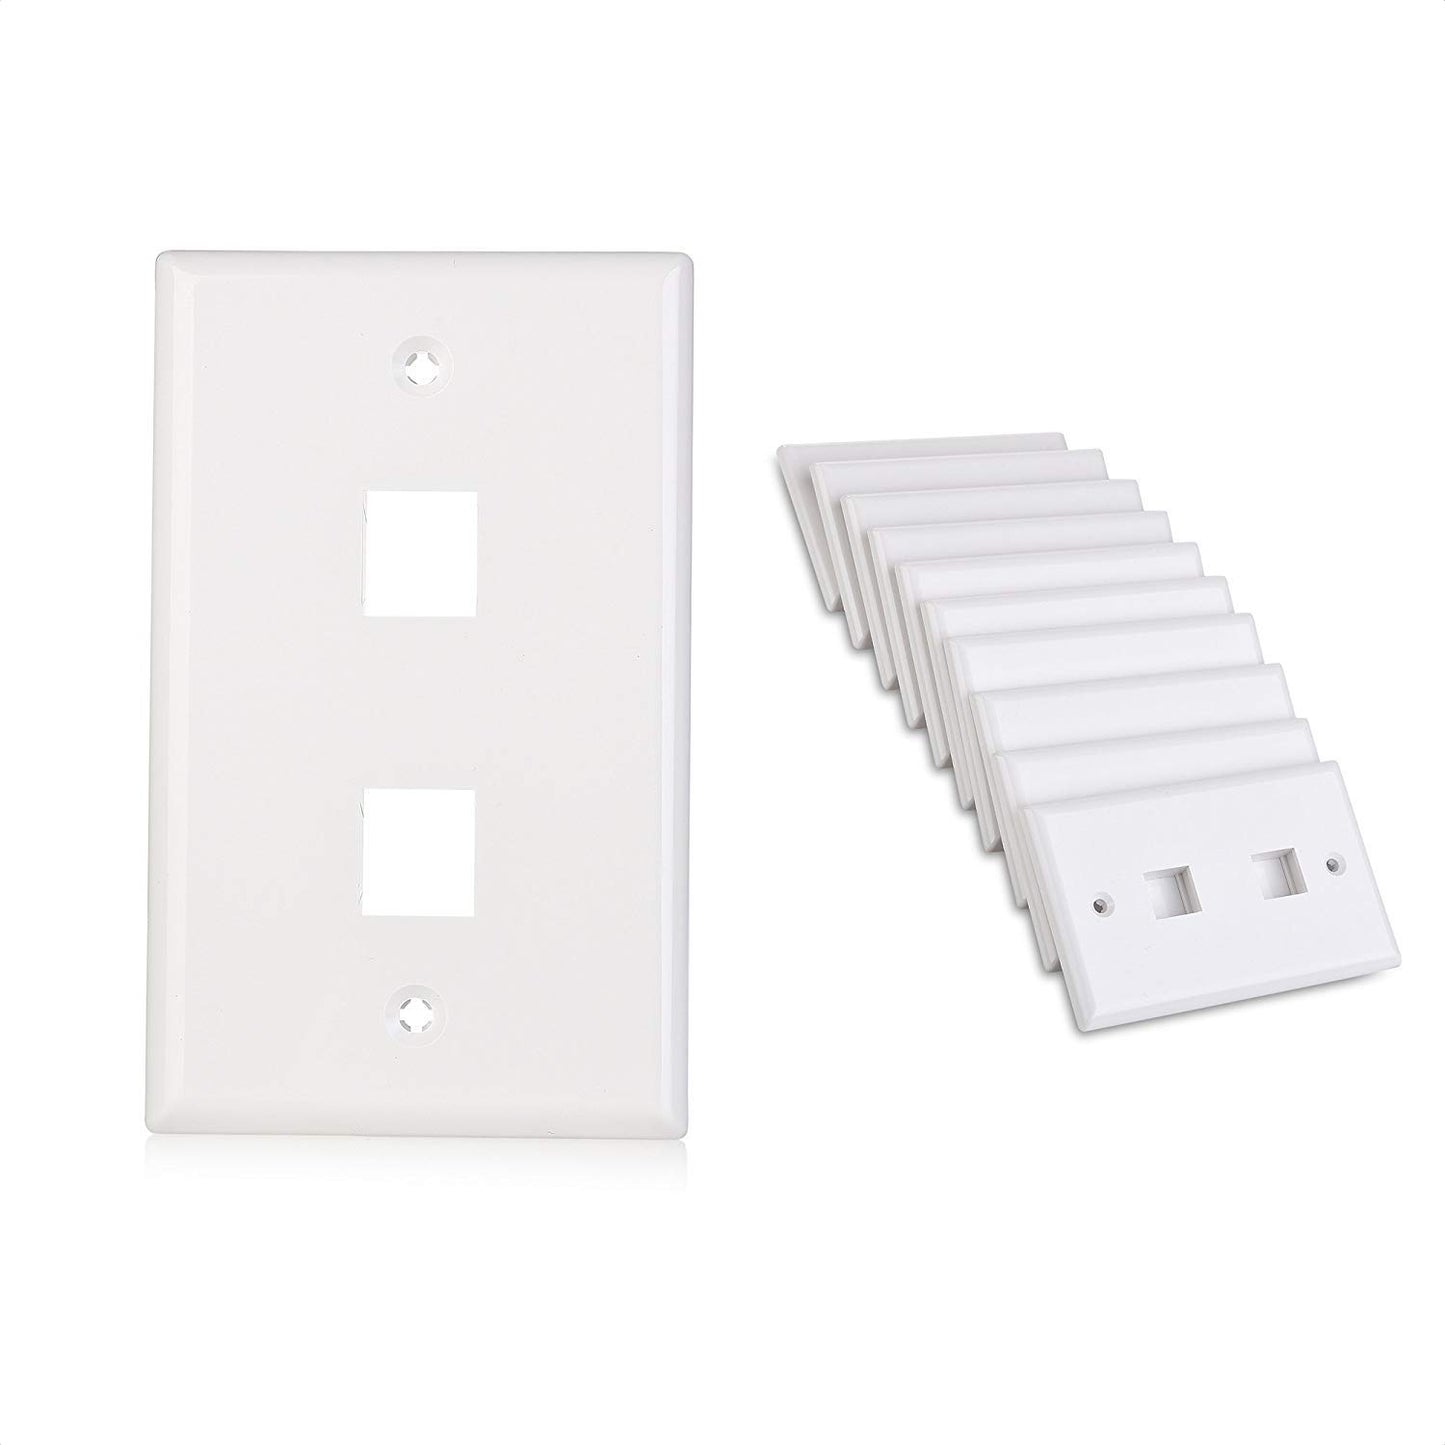 Cable Matters 10-Pack Low Profile 2-Port Keystone Jack Wall Plate in White